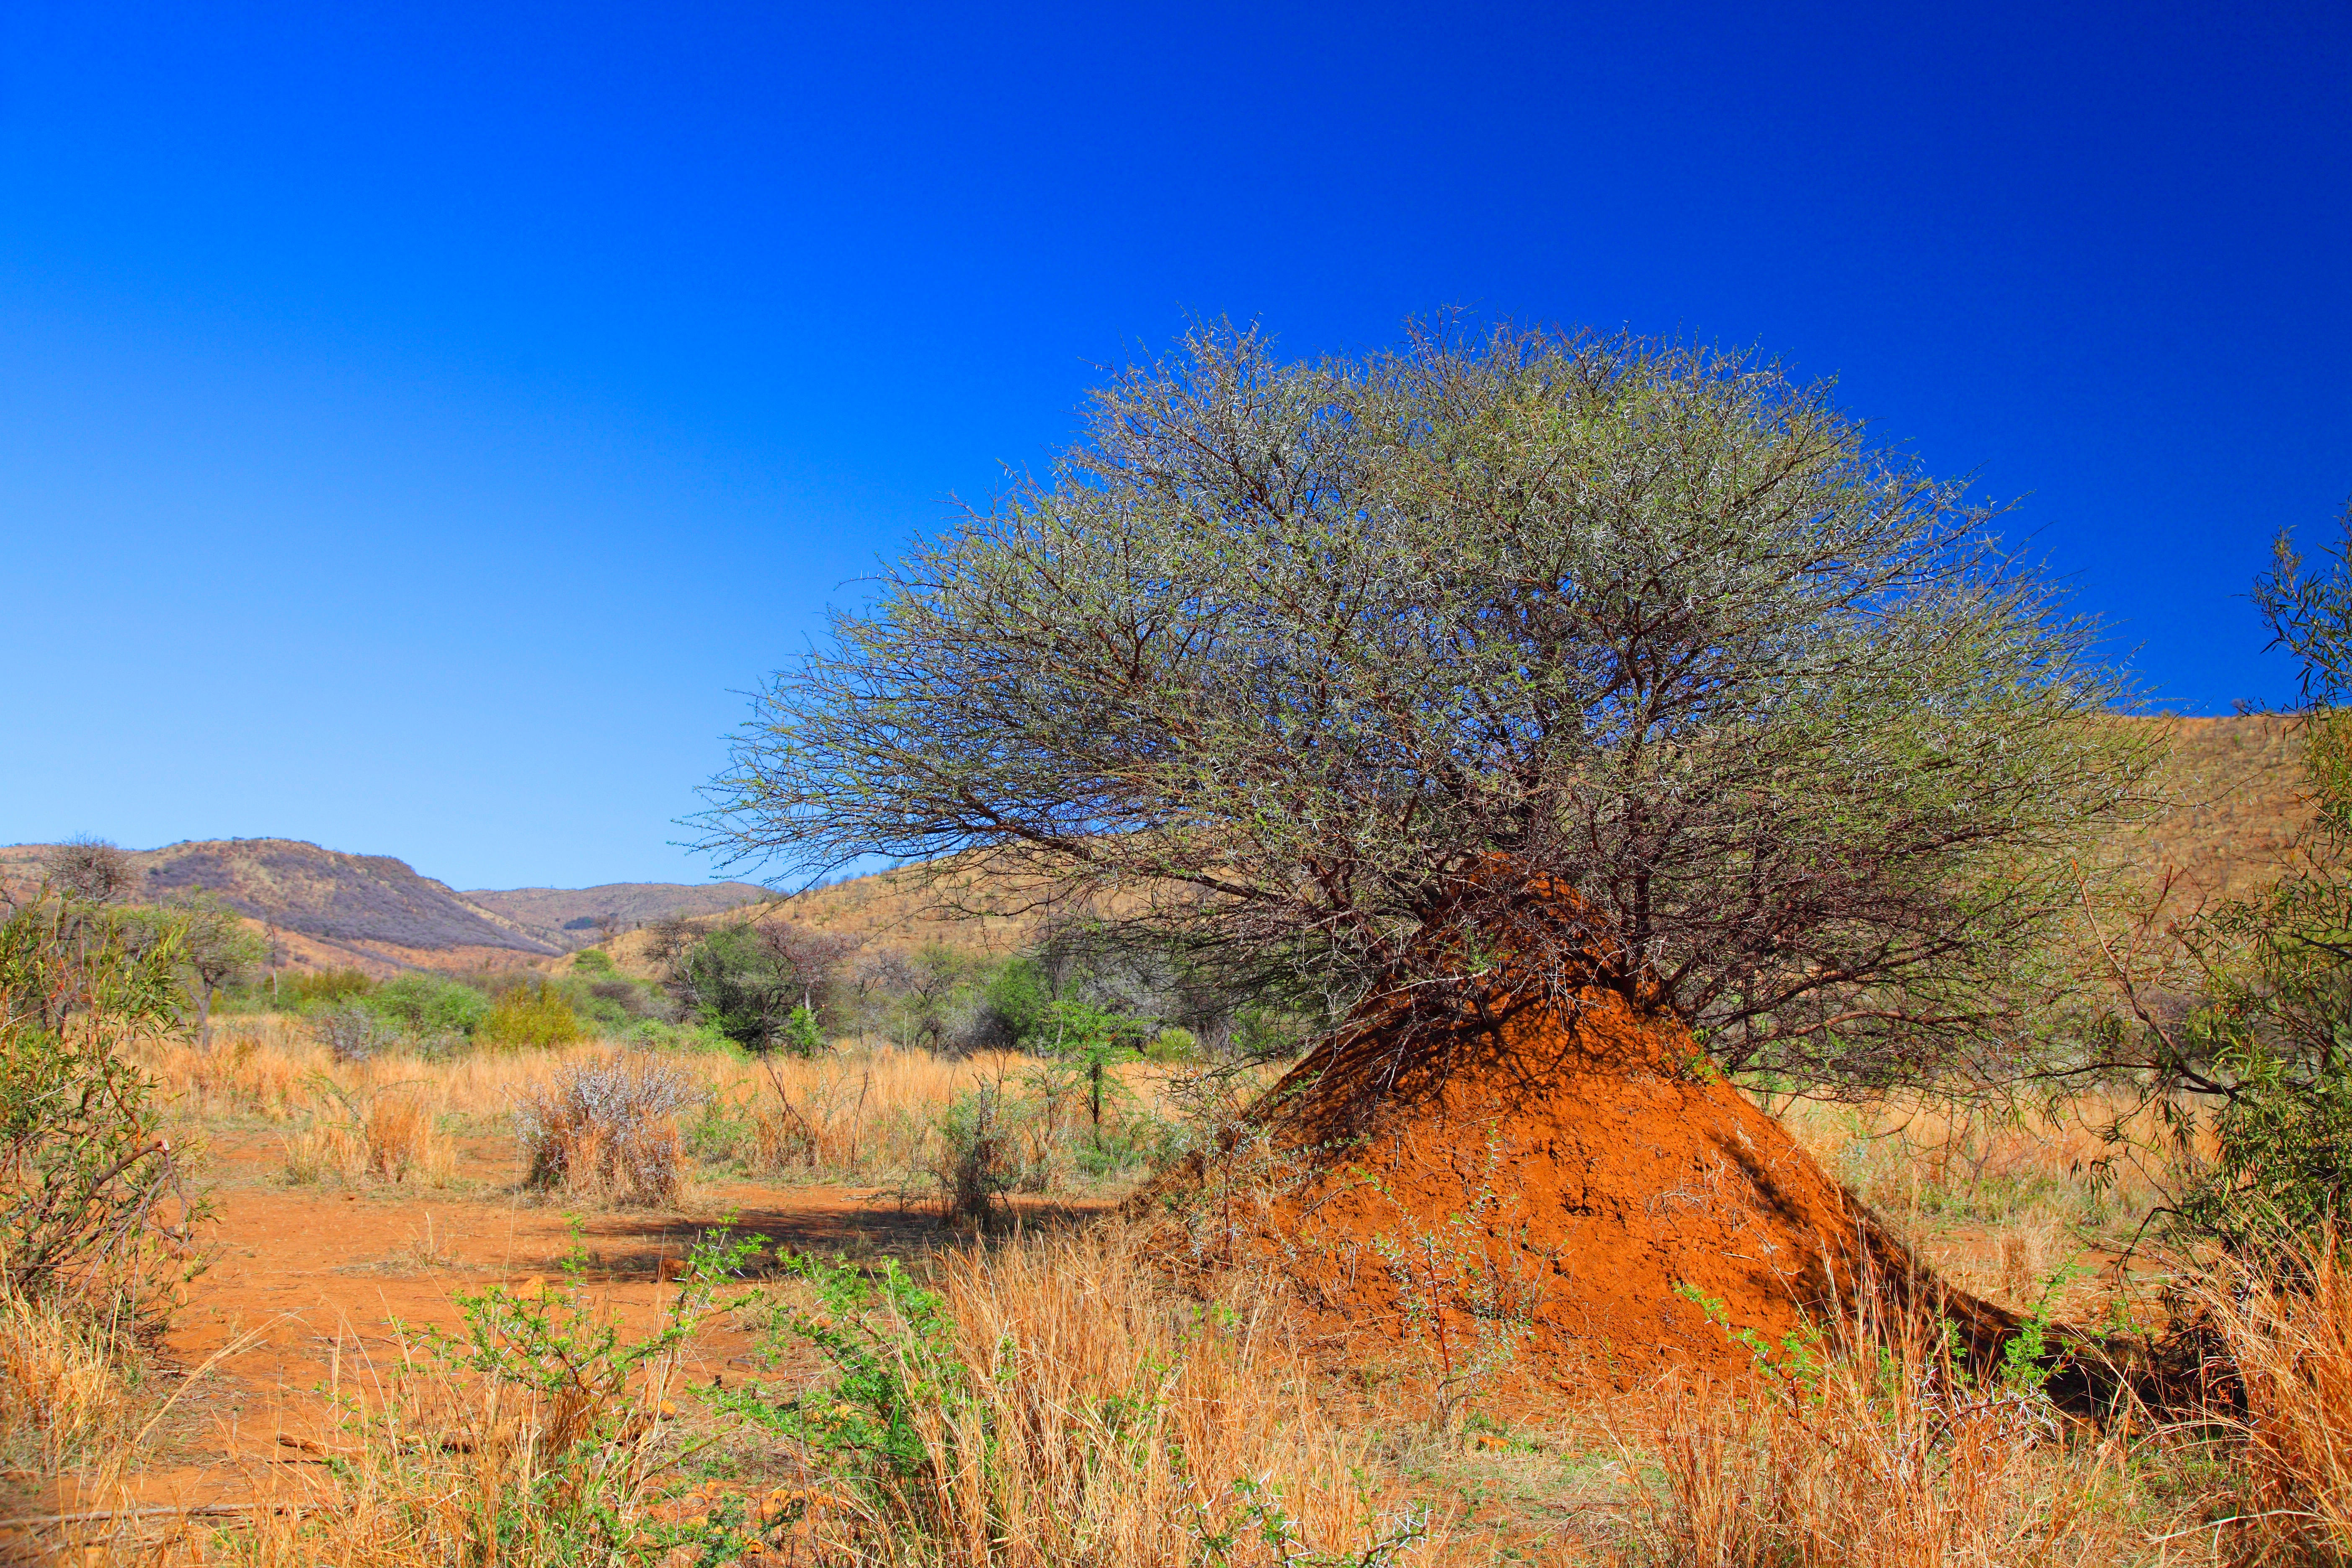 A termite mound with vegetation growing out of the top